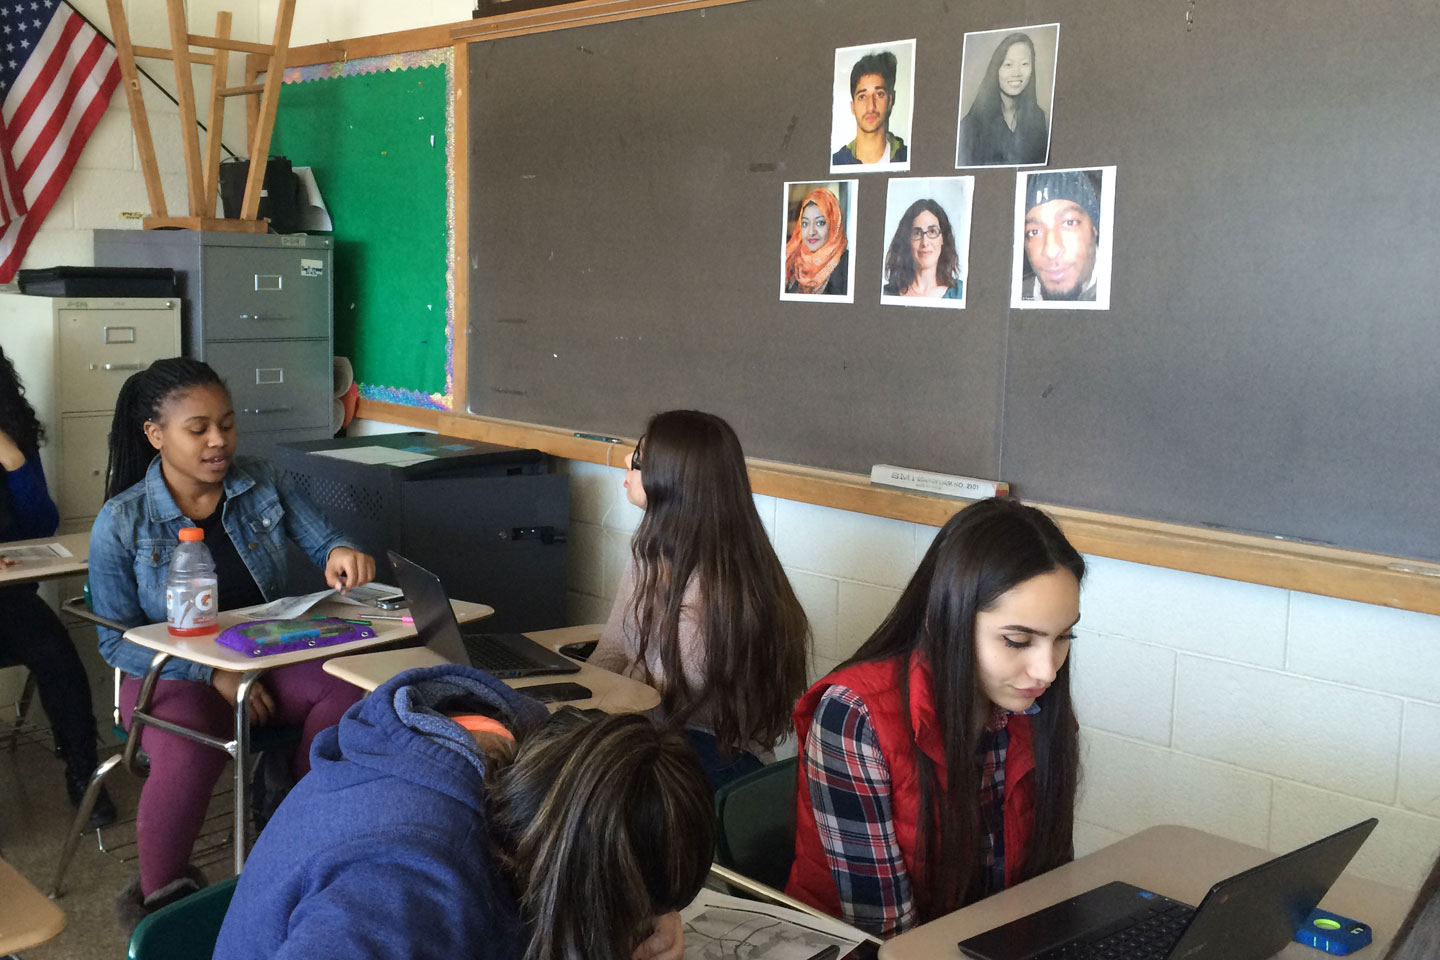 Students at Norwalk High School discuss the Serial podcast, while images of key players loom on the wall, including Adnan Syed and Sarah Koenig. Credit: Credit: Sabrina Hiller.